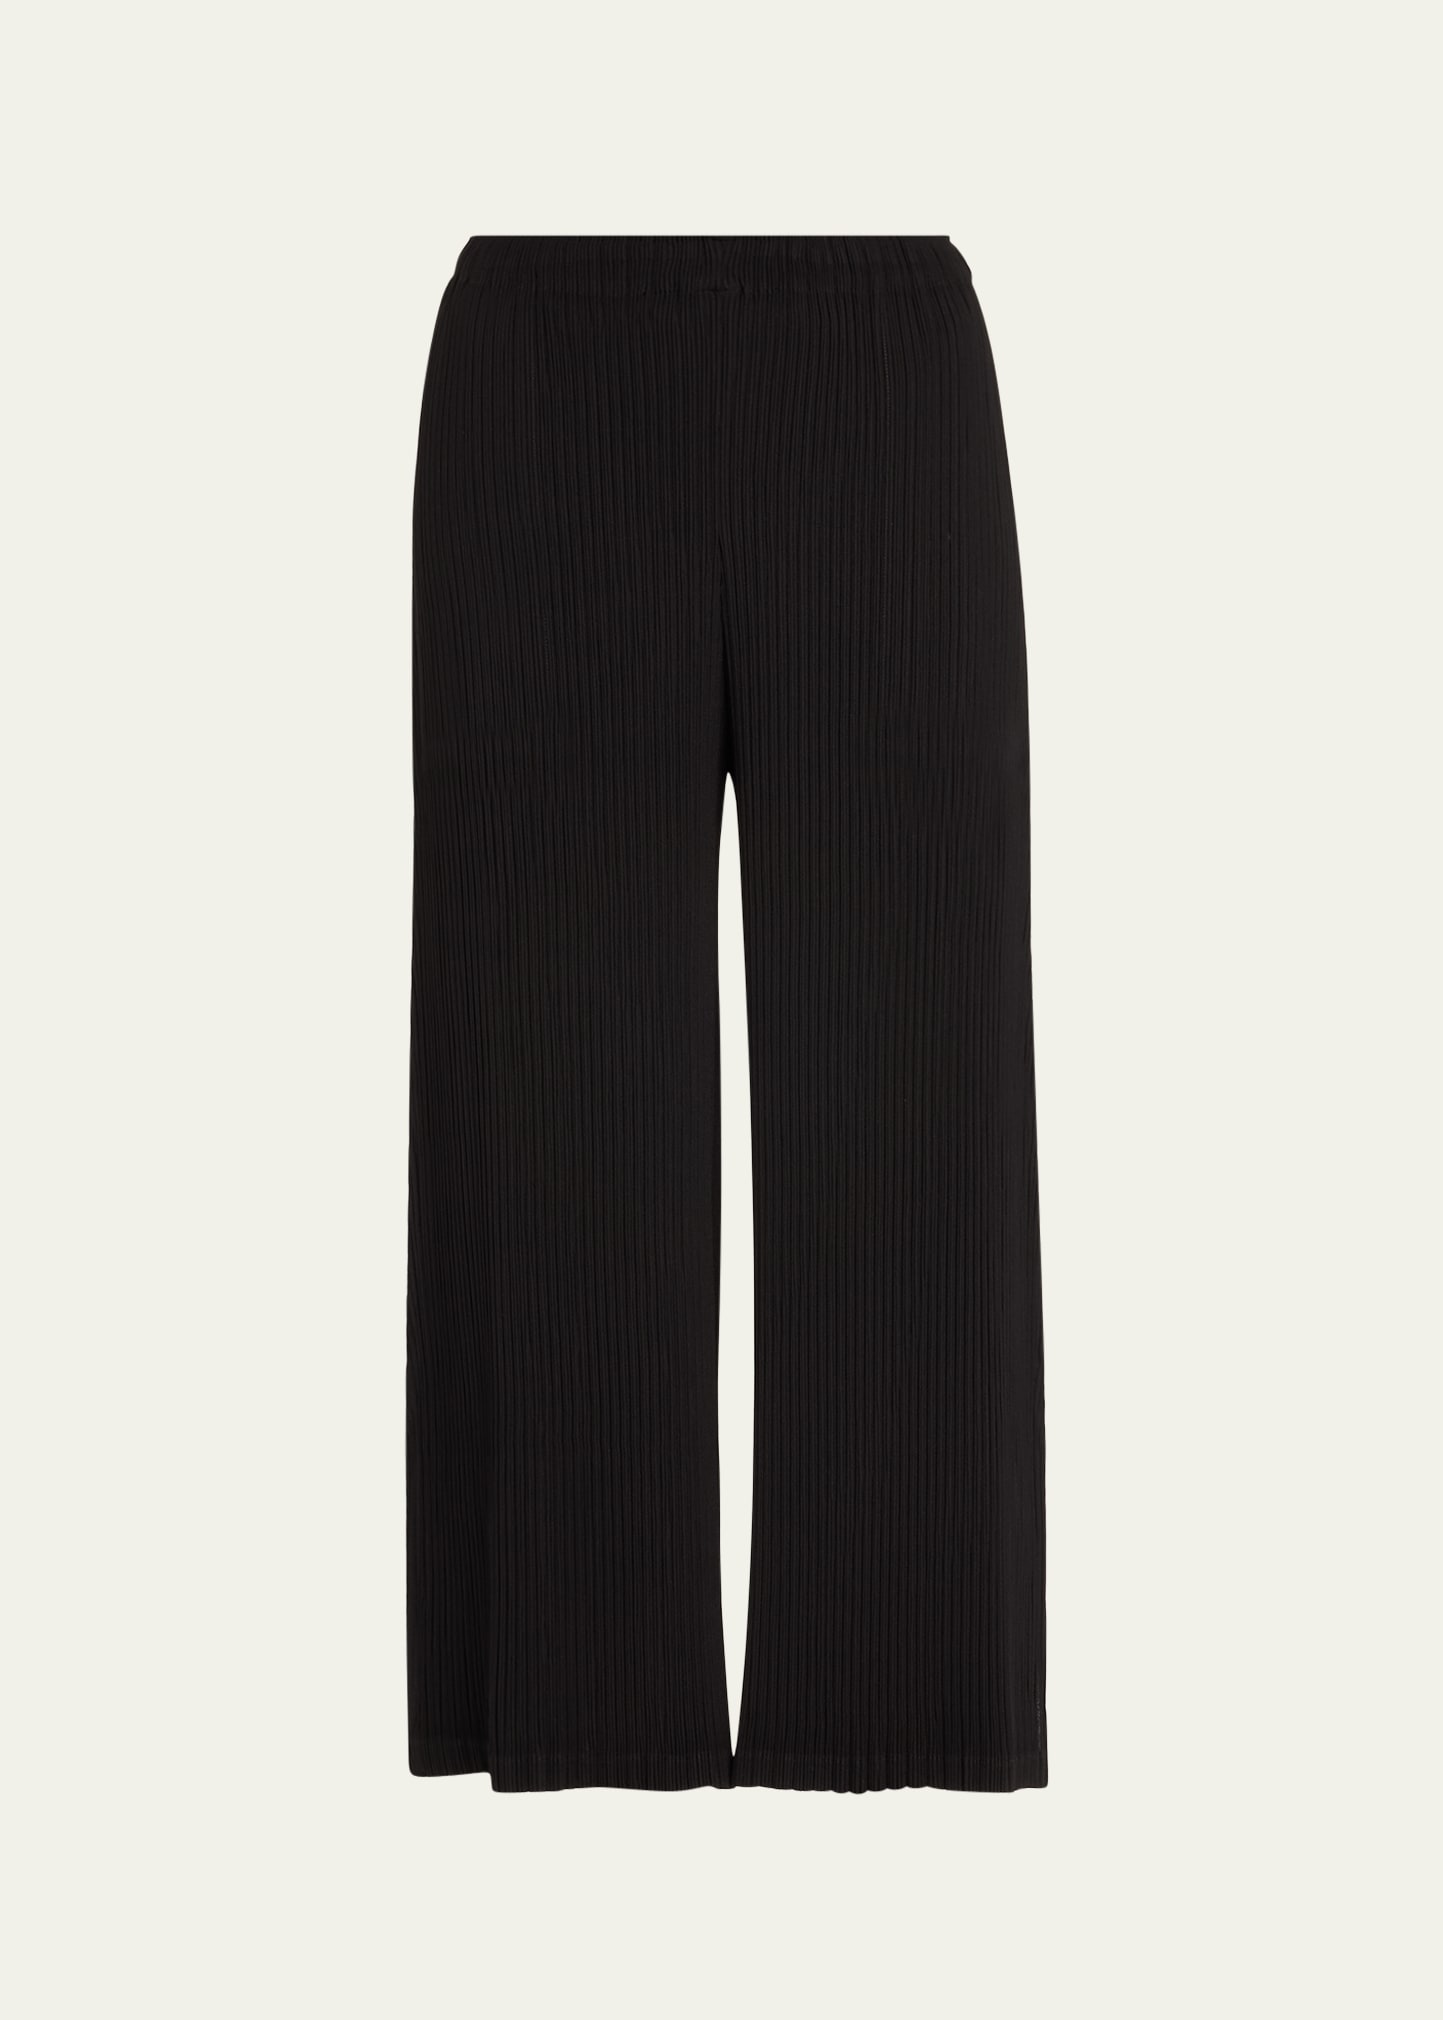 Hatching Pleated Wide Leg Pants